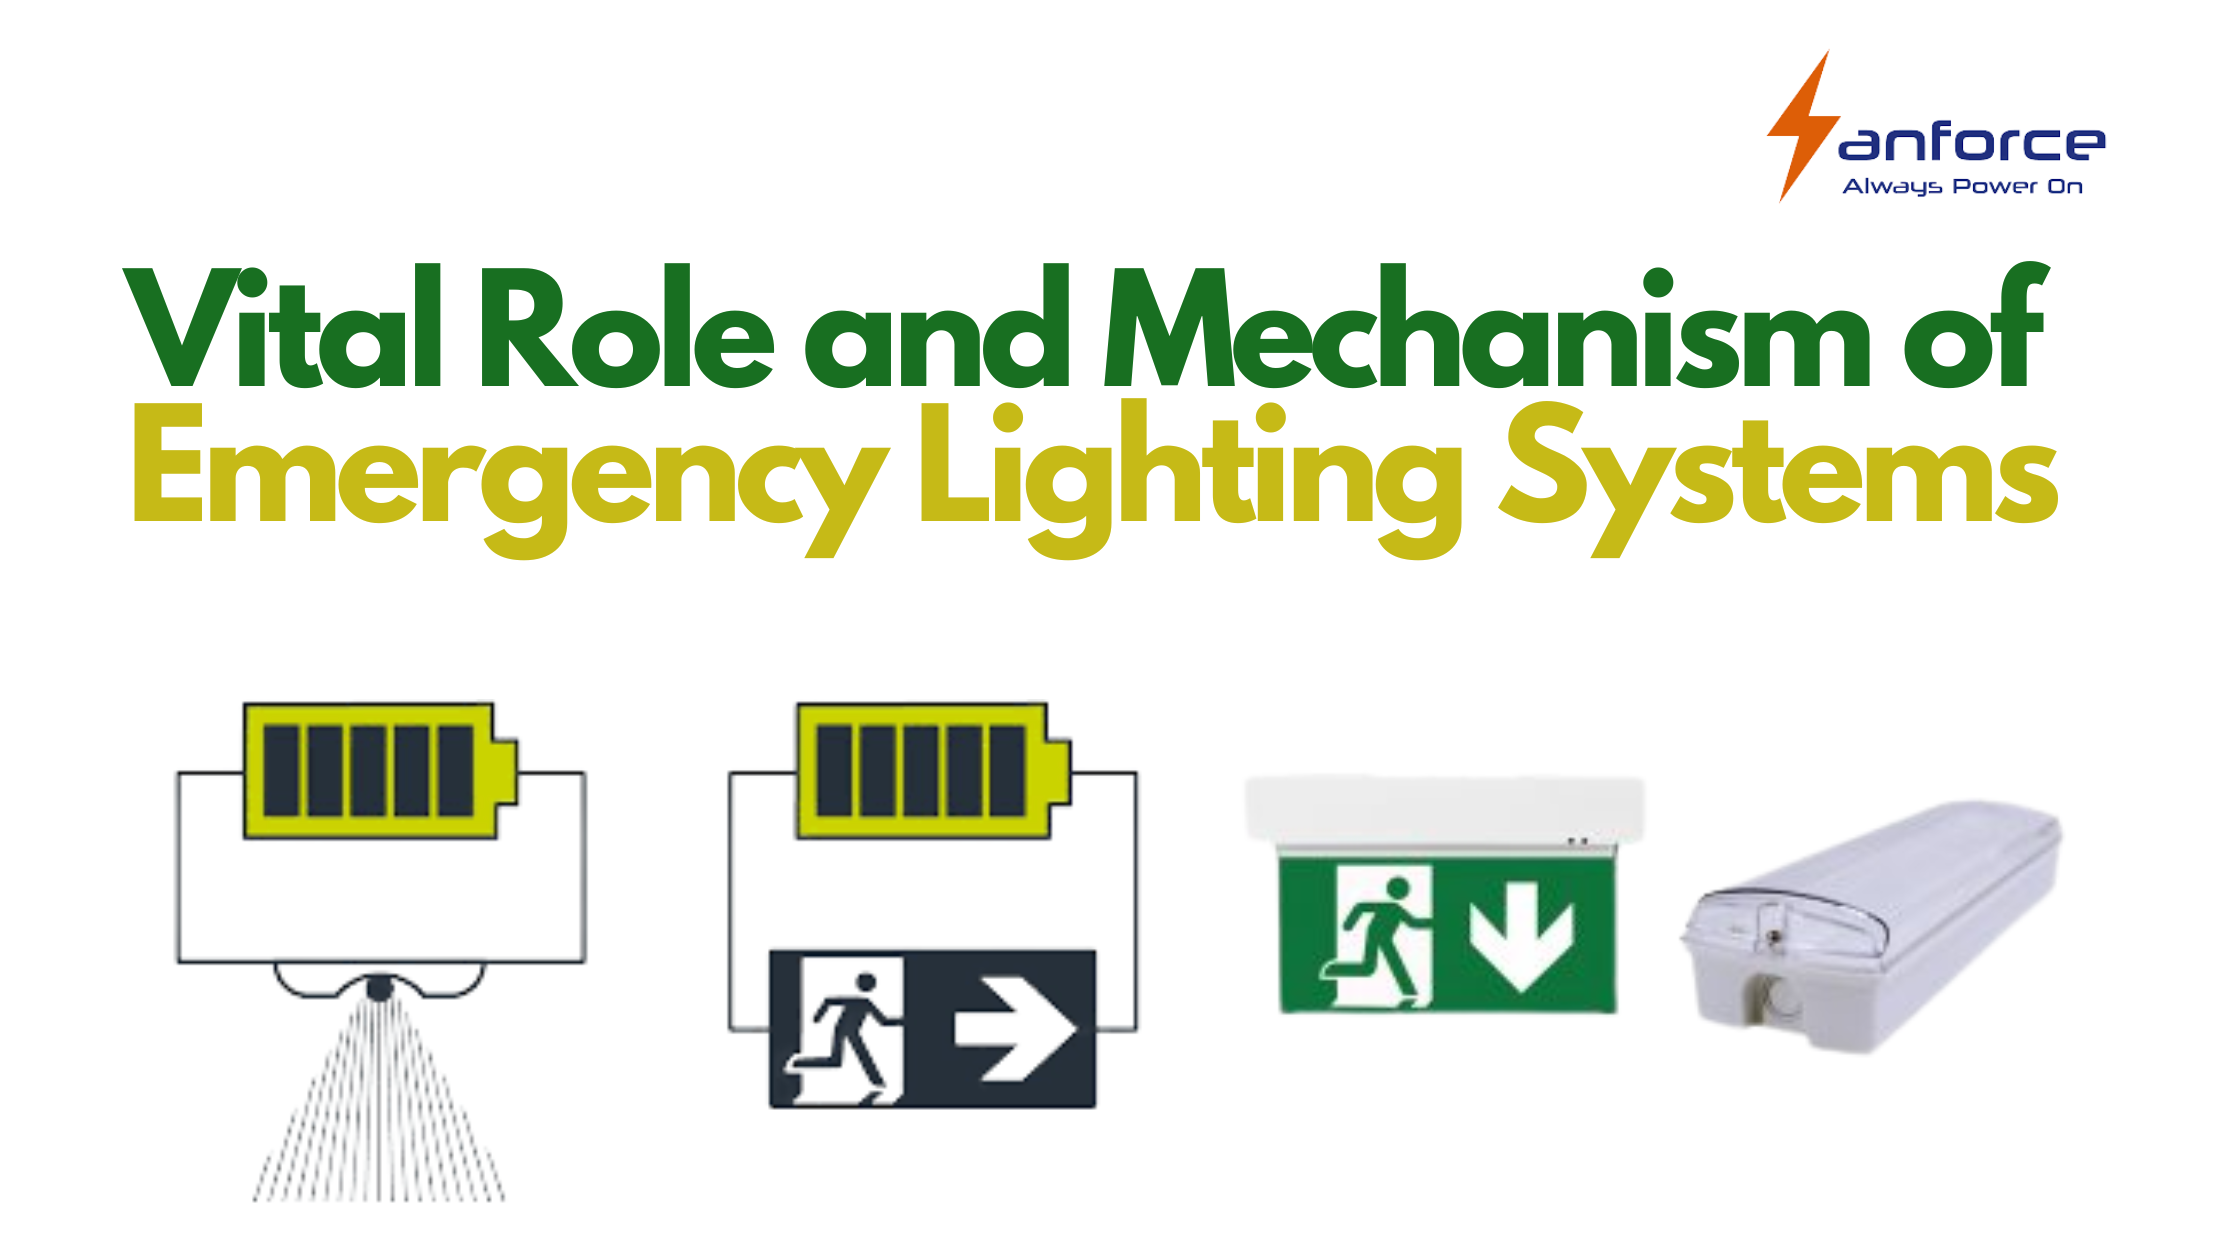 Vital Role and Mechanism of Emergency Lighting Systems